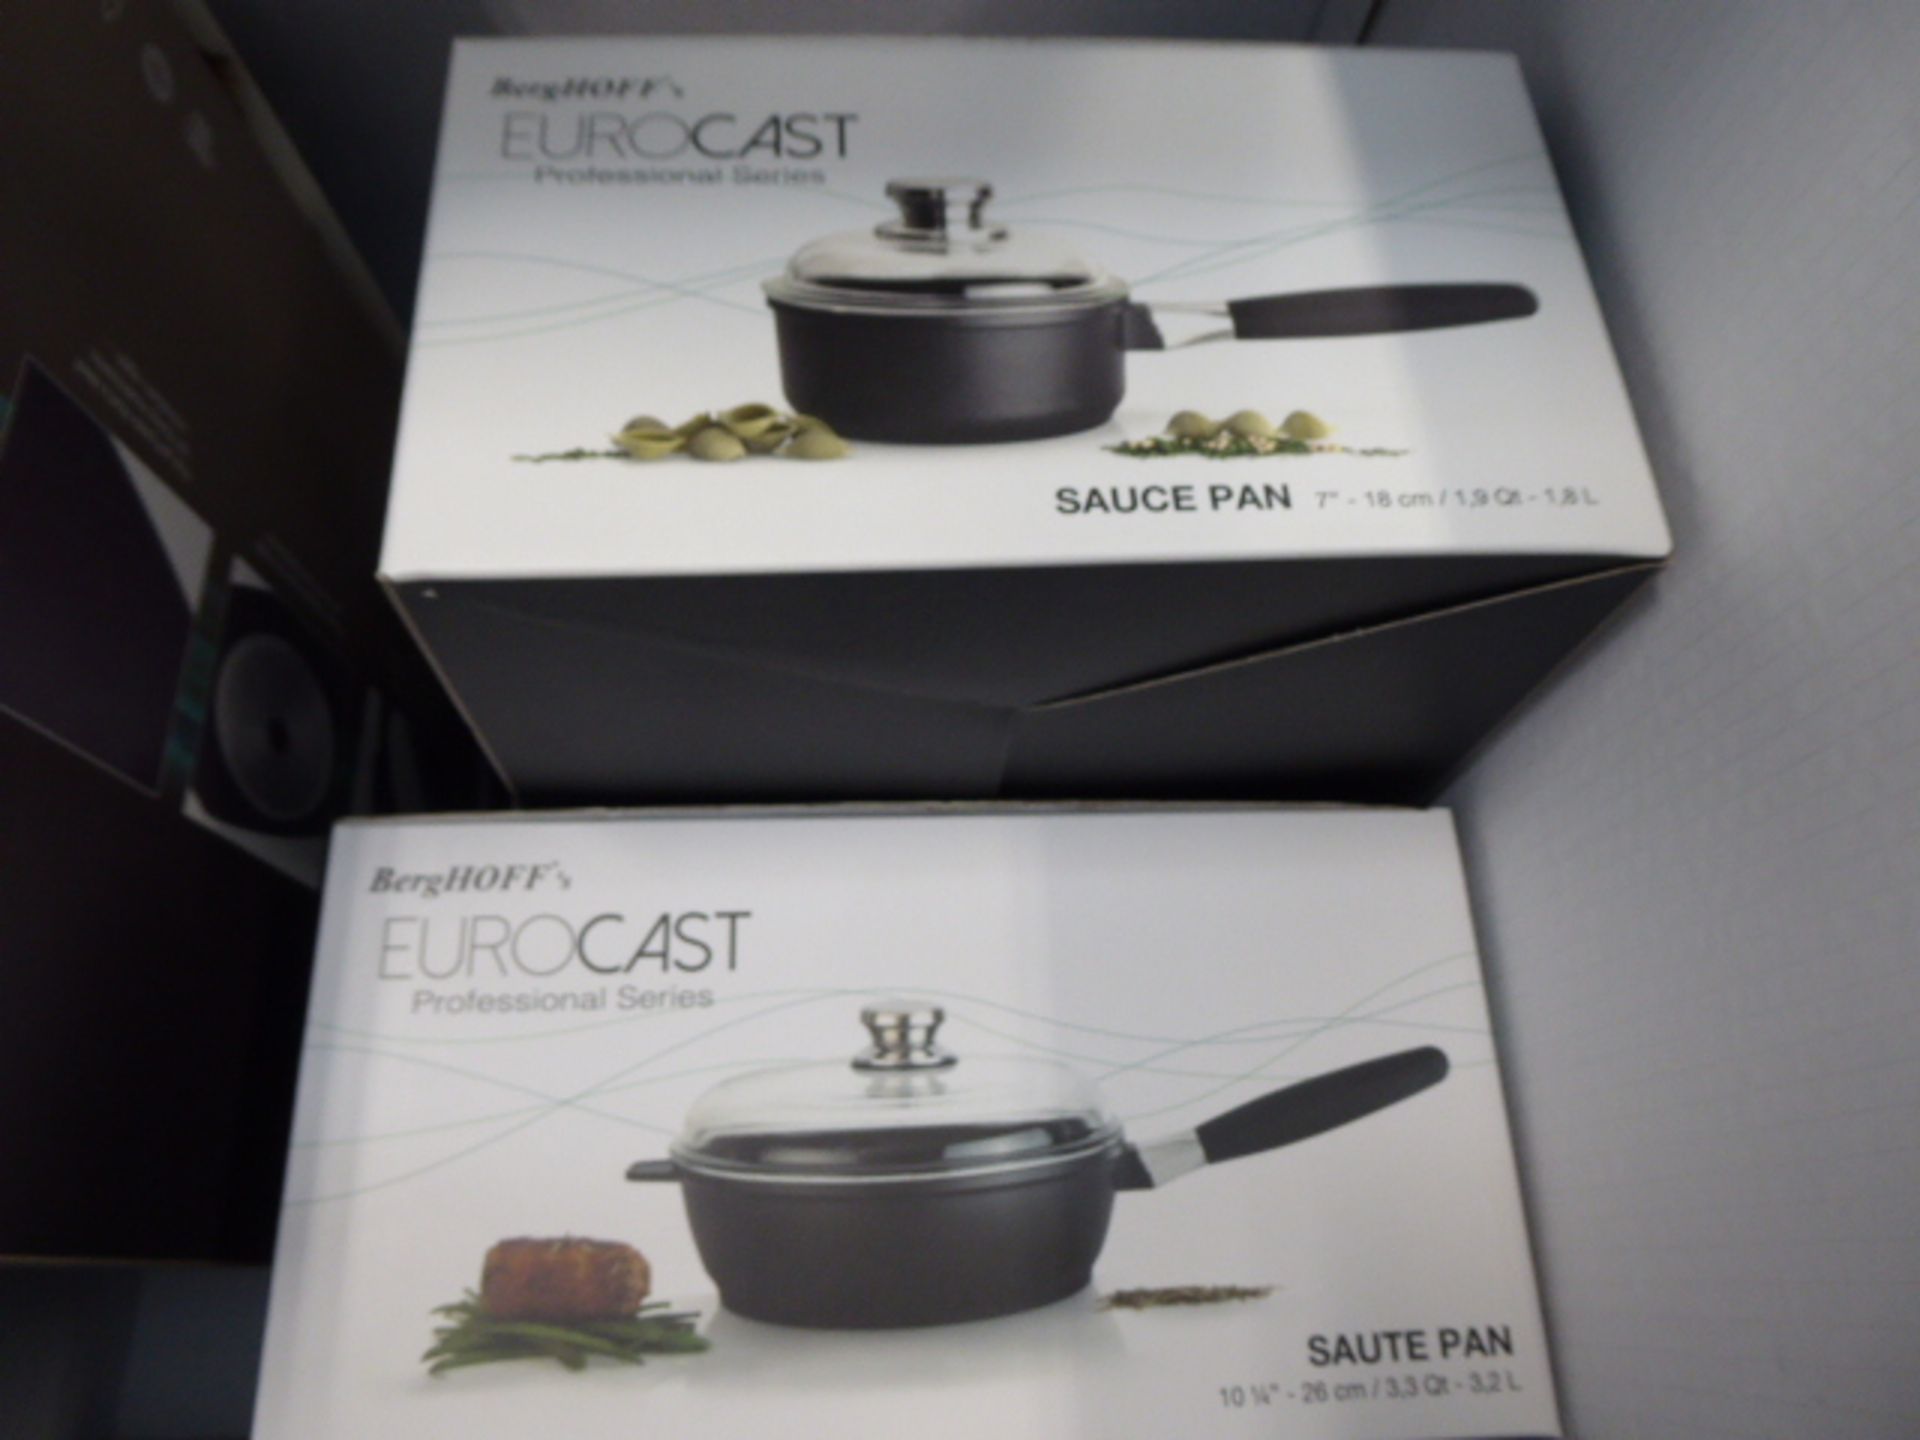 Boxed Eurocast Professional Series cookware set - Image 3 of 4